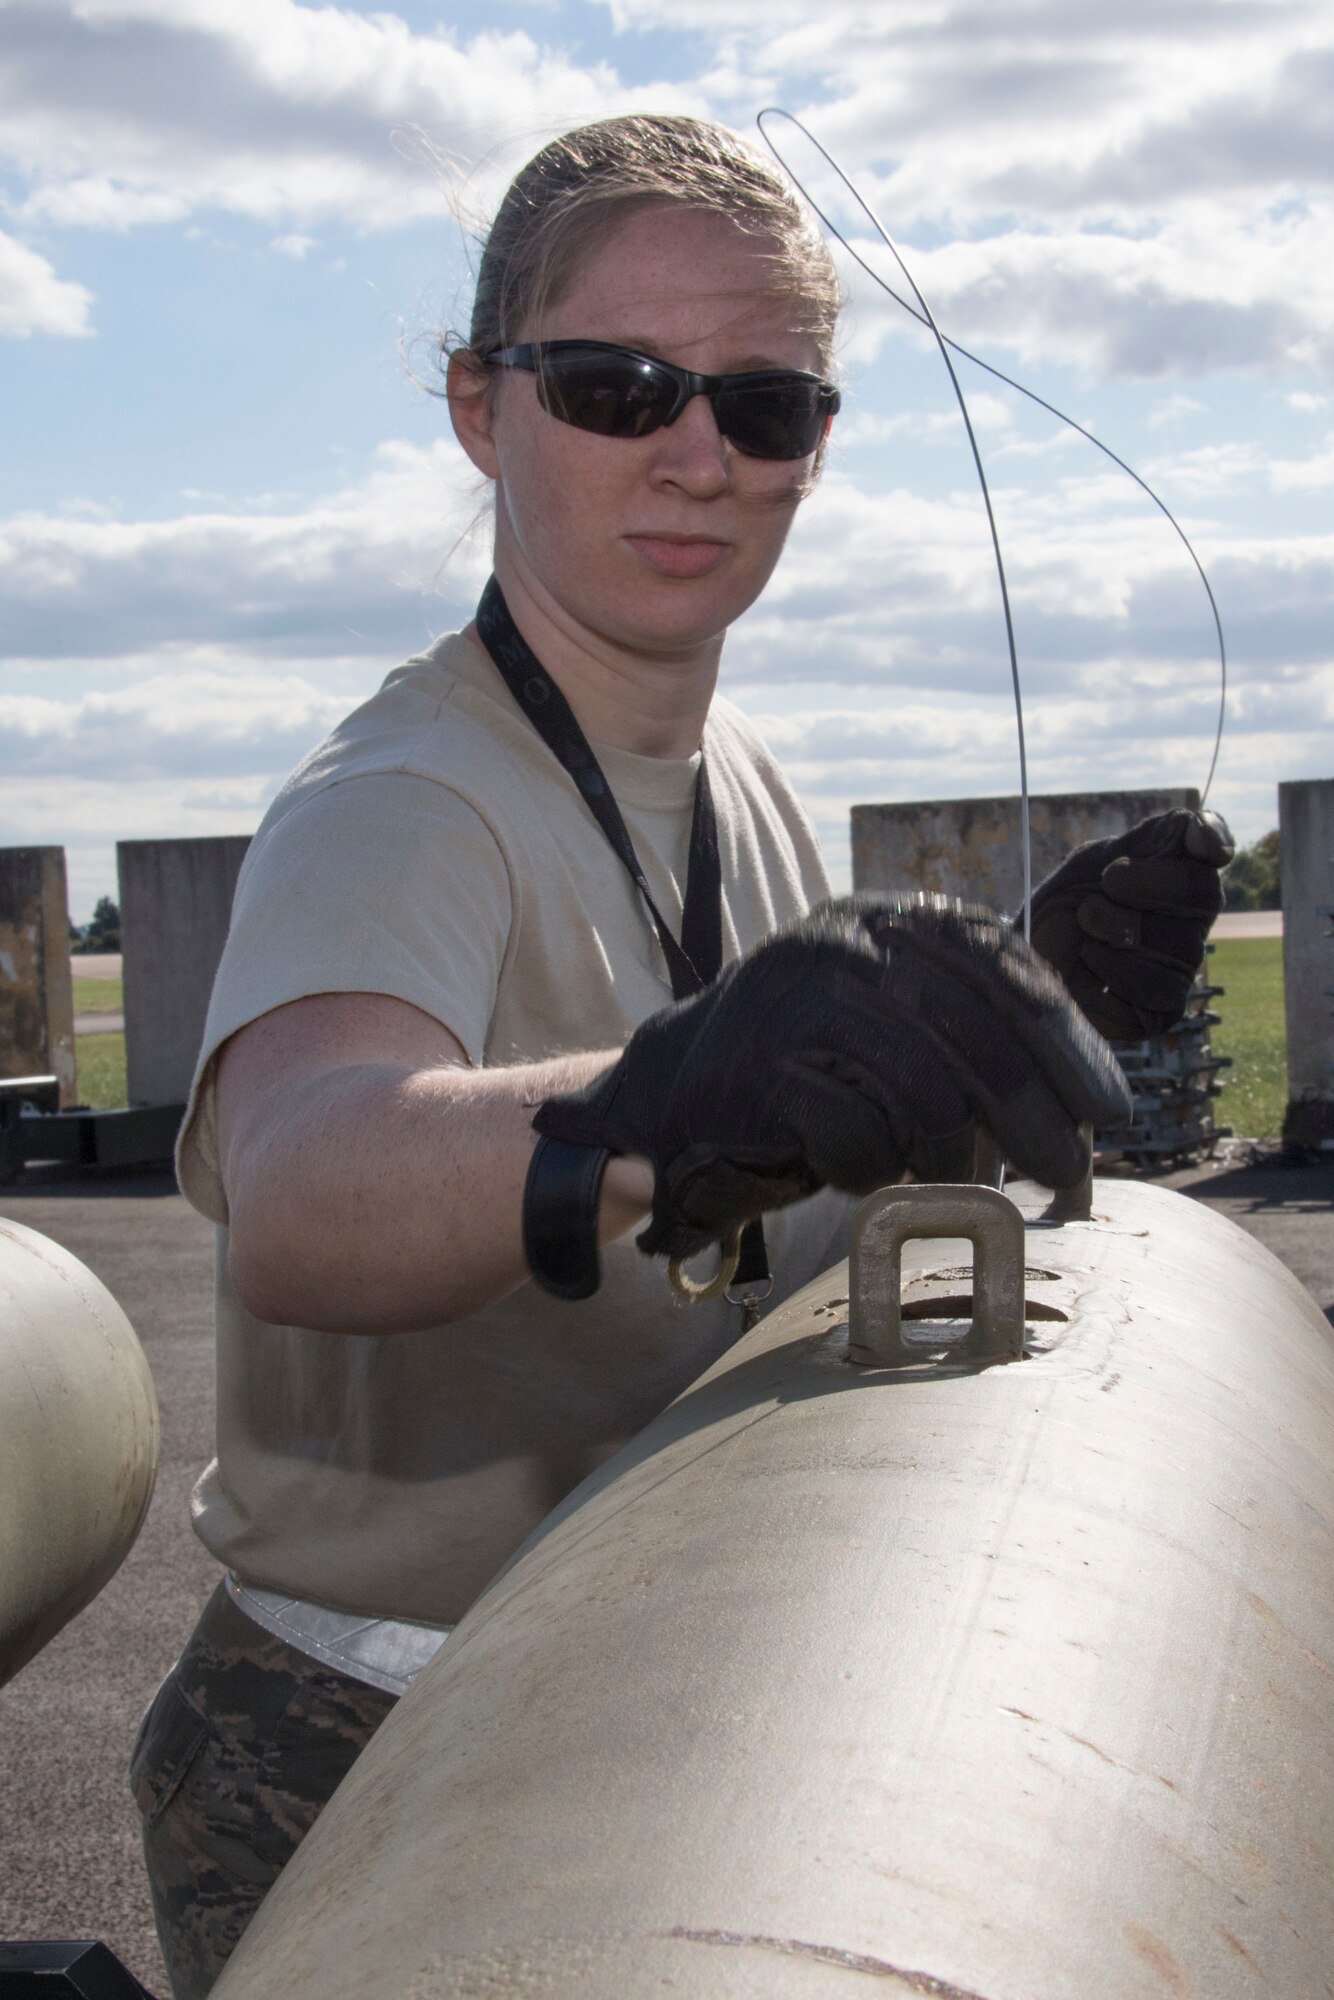 Staff Sgt. Ashley Johnson, 307th Maintenance Squadron munitions technician, prepares a munition at RAF Fairford, United Kingdom, Sept. 8, 2018.  Citizen Reserve Airmen of the 307th Maintenance Squadron and their active duty counterparts from the 2nd Bomb Wing worked together in support of the bomber task force rotating through the base.  (U.S. Air Force photo by Master Sgt. Ted Daigle/released)